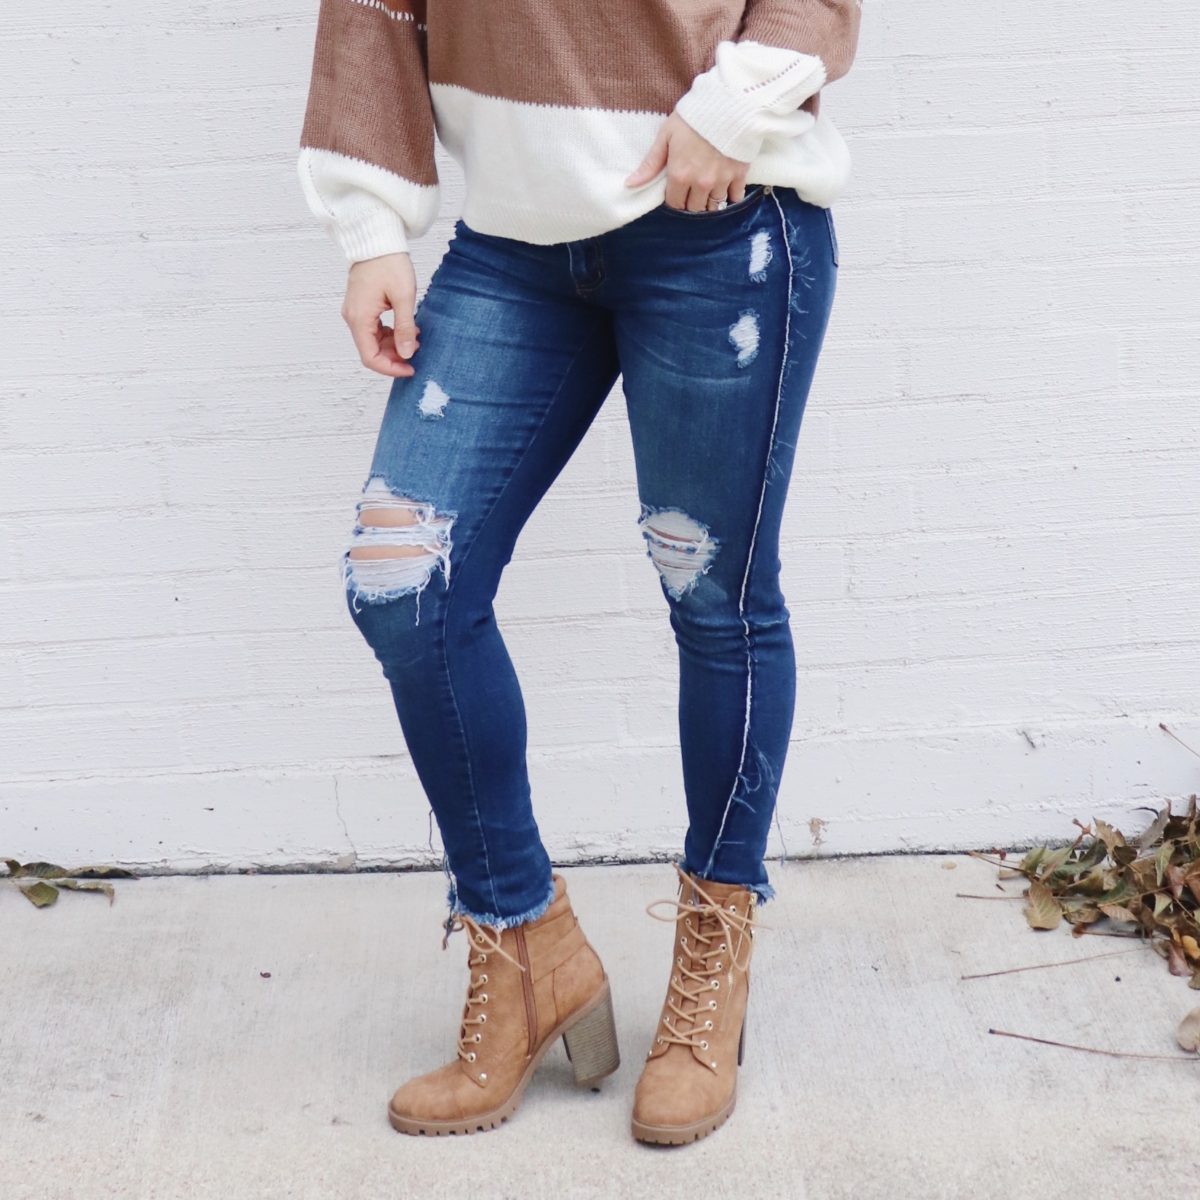 lifestyled-be-me-winter-fashion-boots-2019